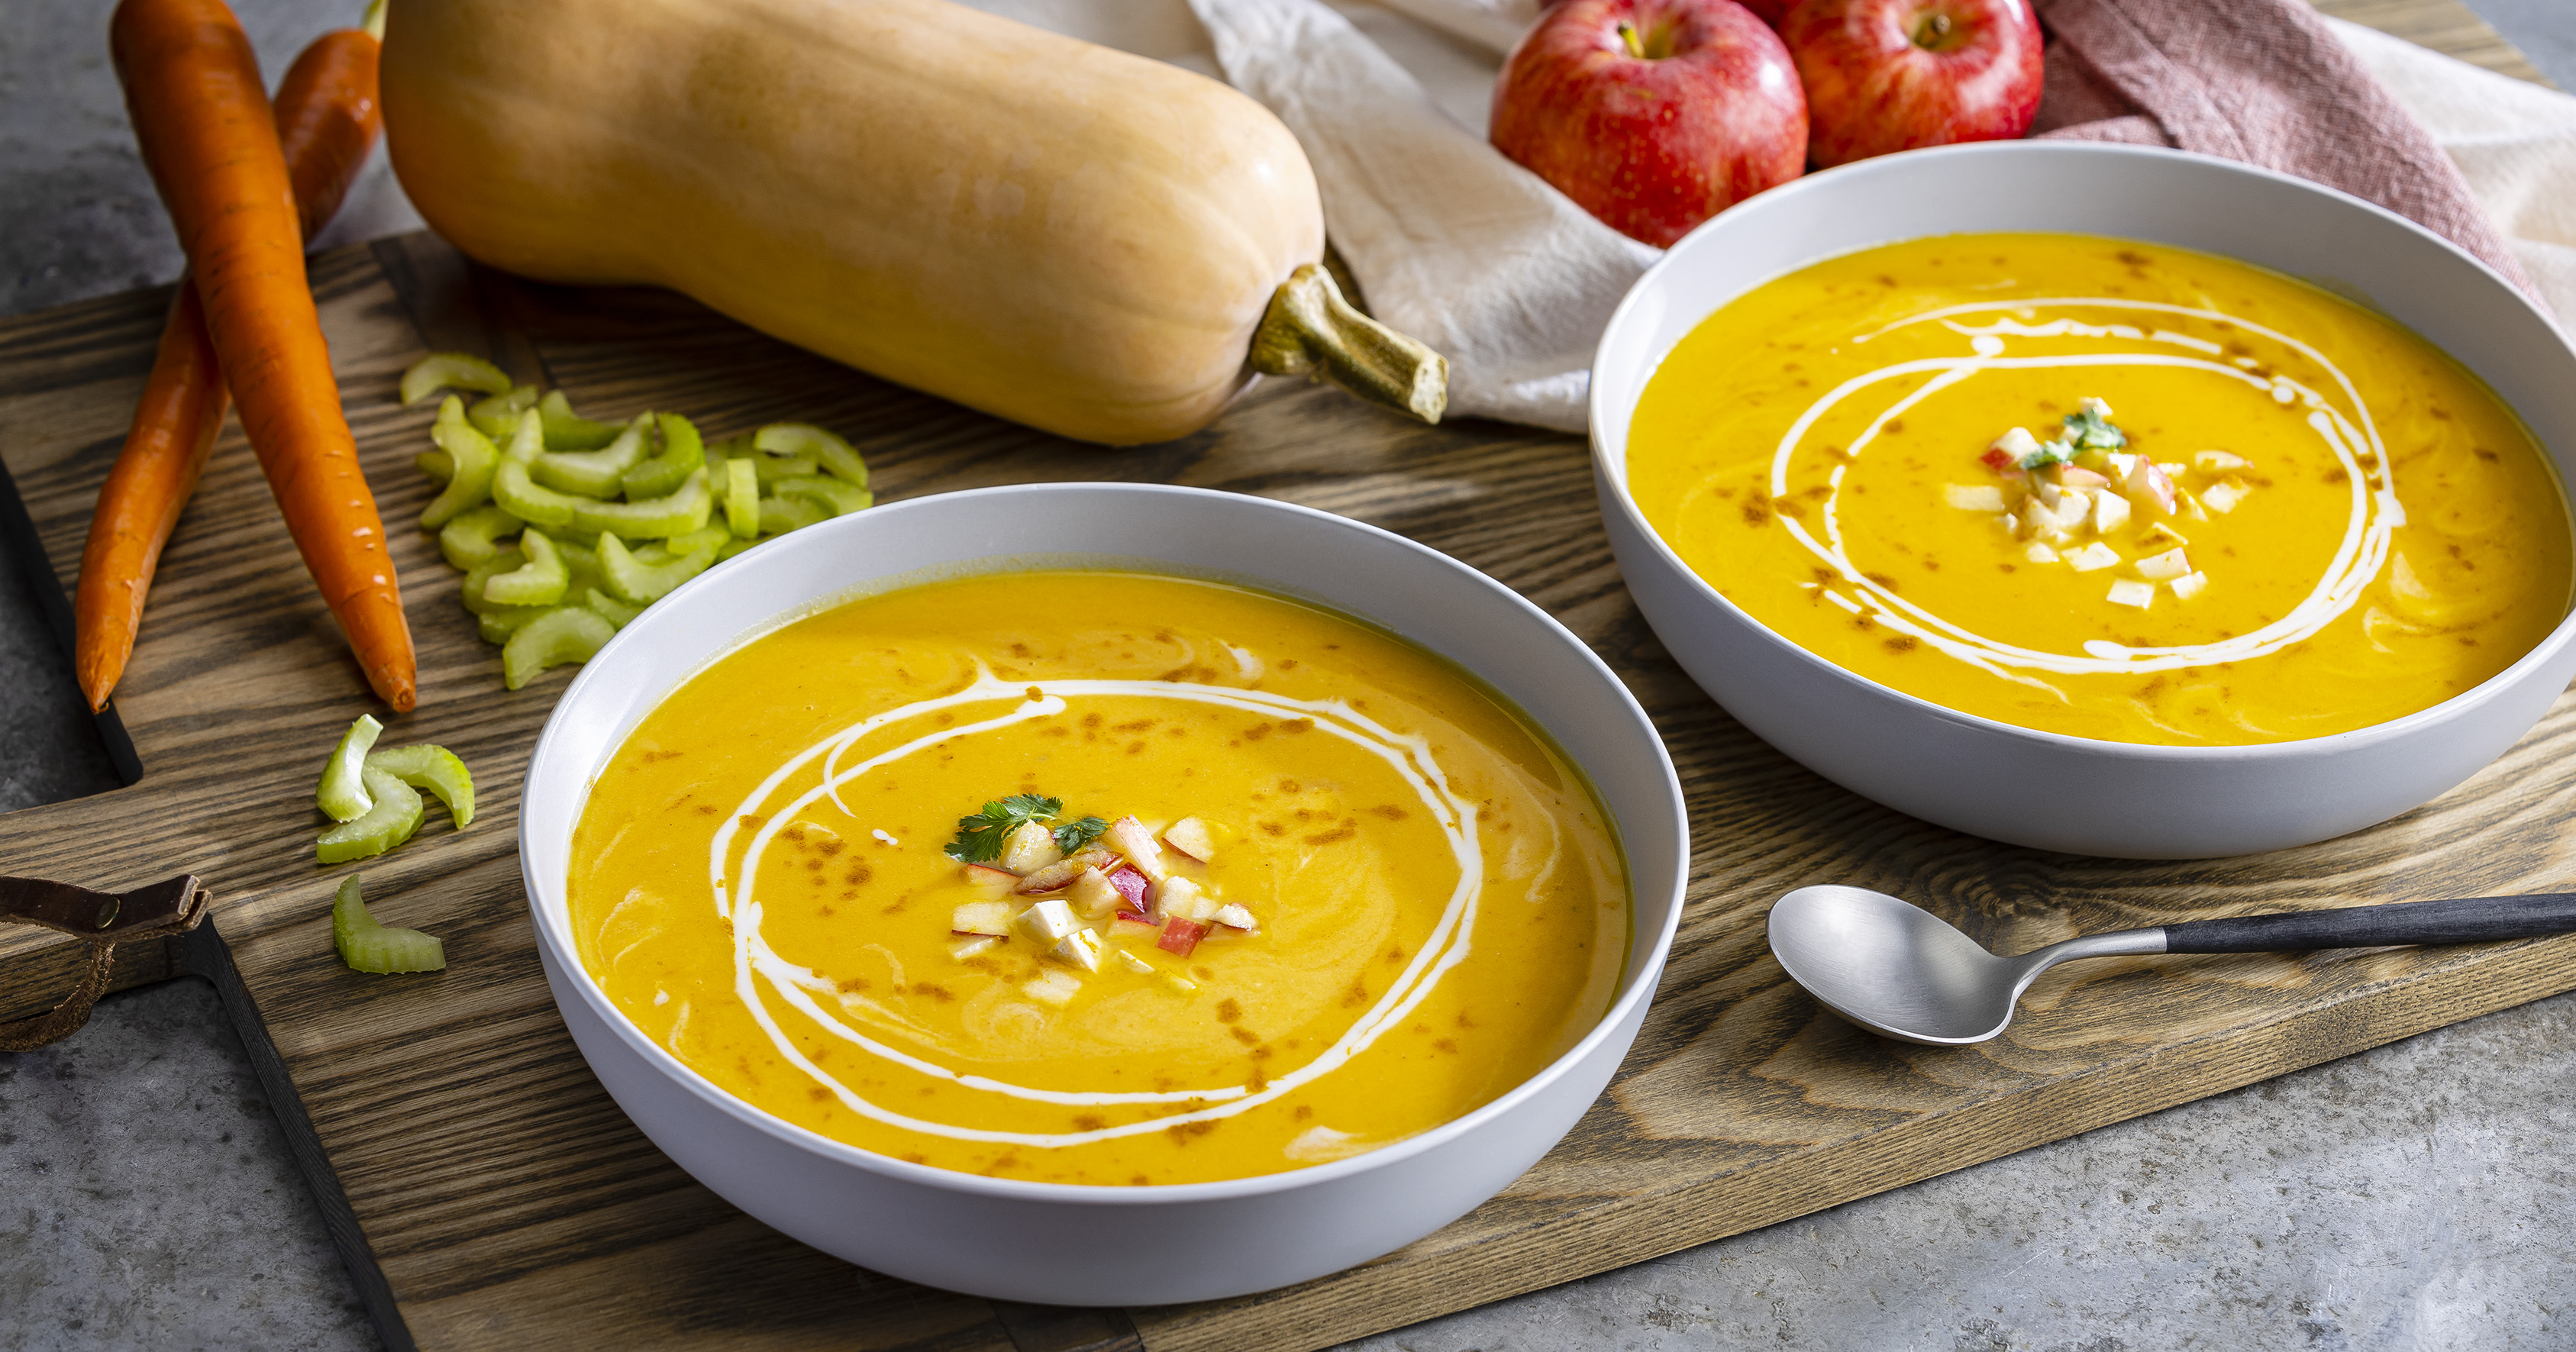 Curried Apple and Butternut Squash Soup